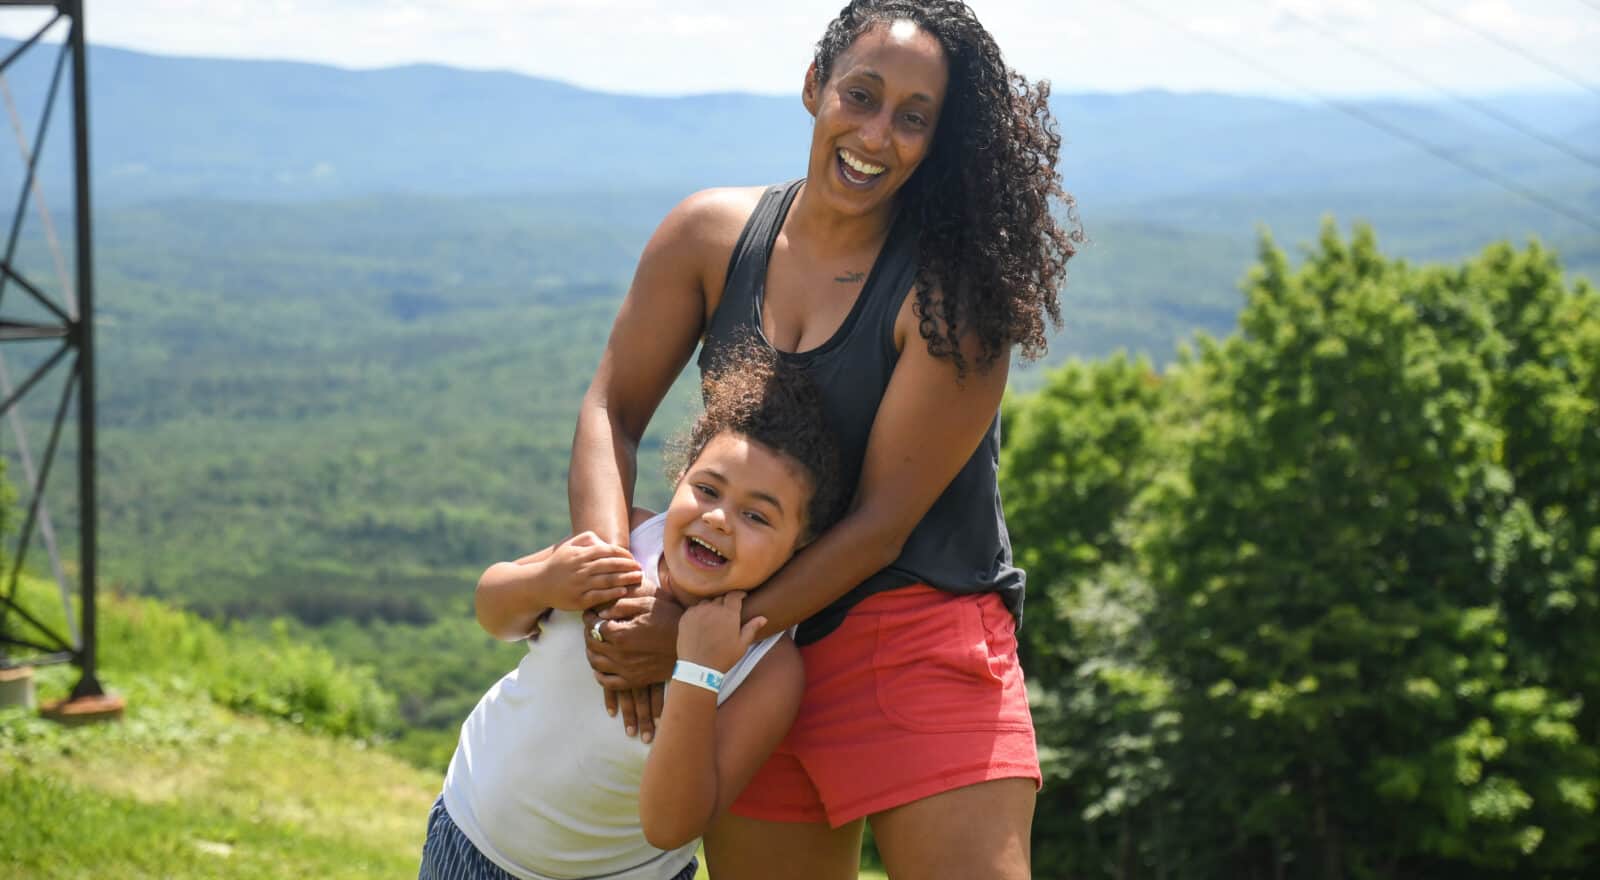 Rachel Hailey, founder of DEI Outdoors, and her daughter, Aria, laugh together on a ridge in the sun, with a wide view over the valley.